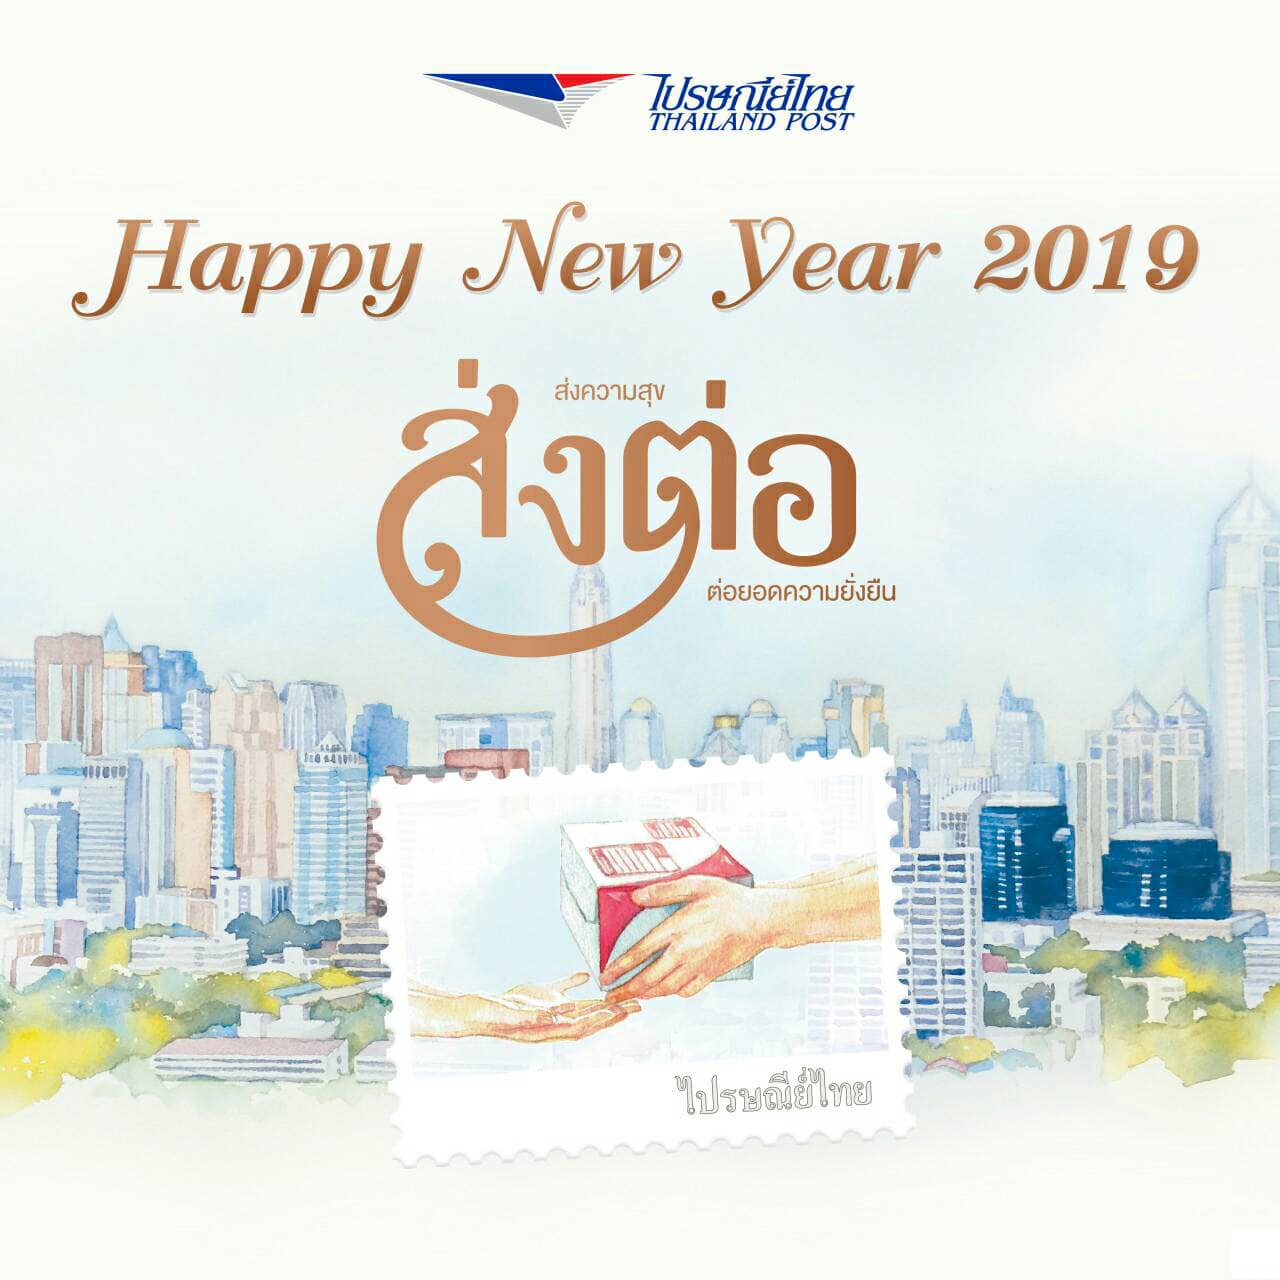 New Year 2019 Greetings from Thailand Post